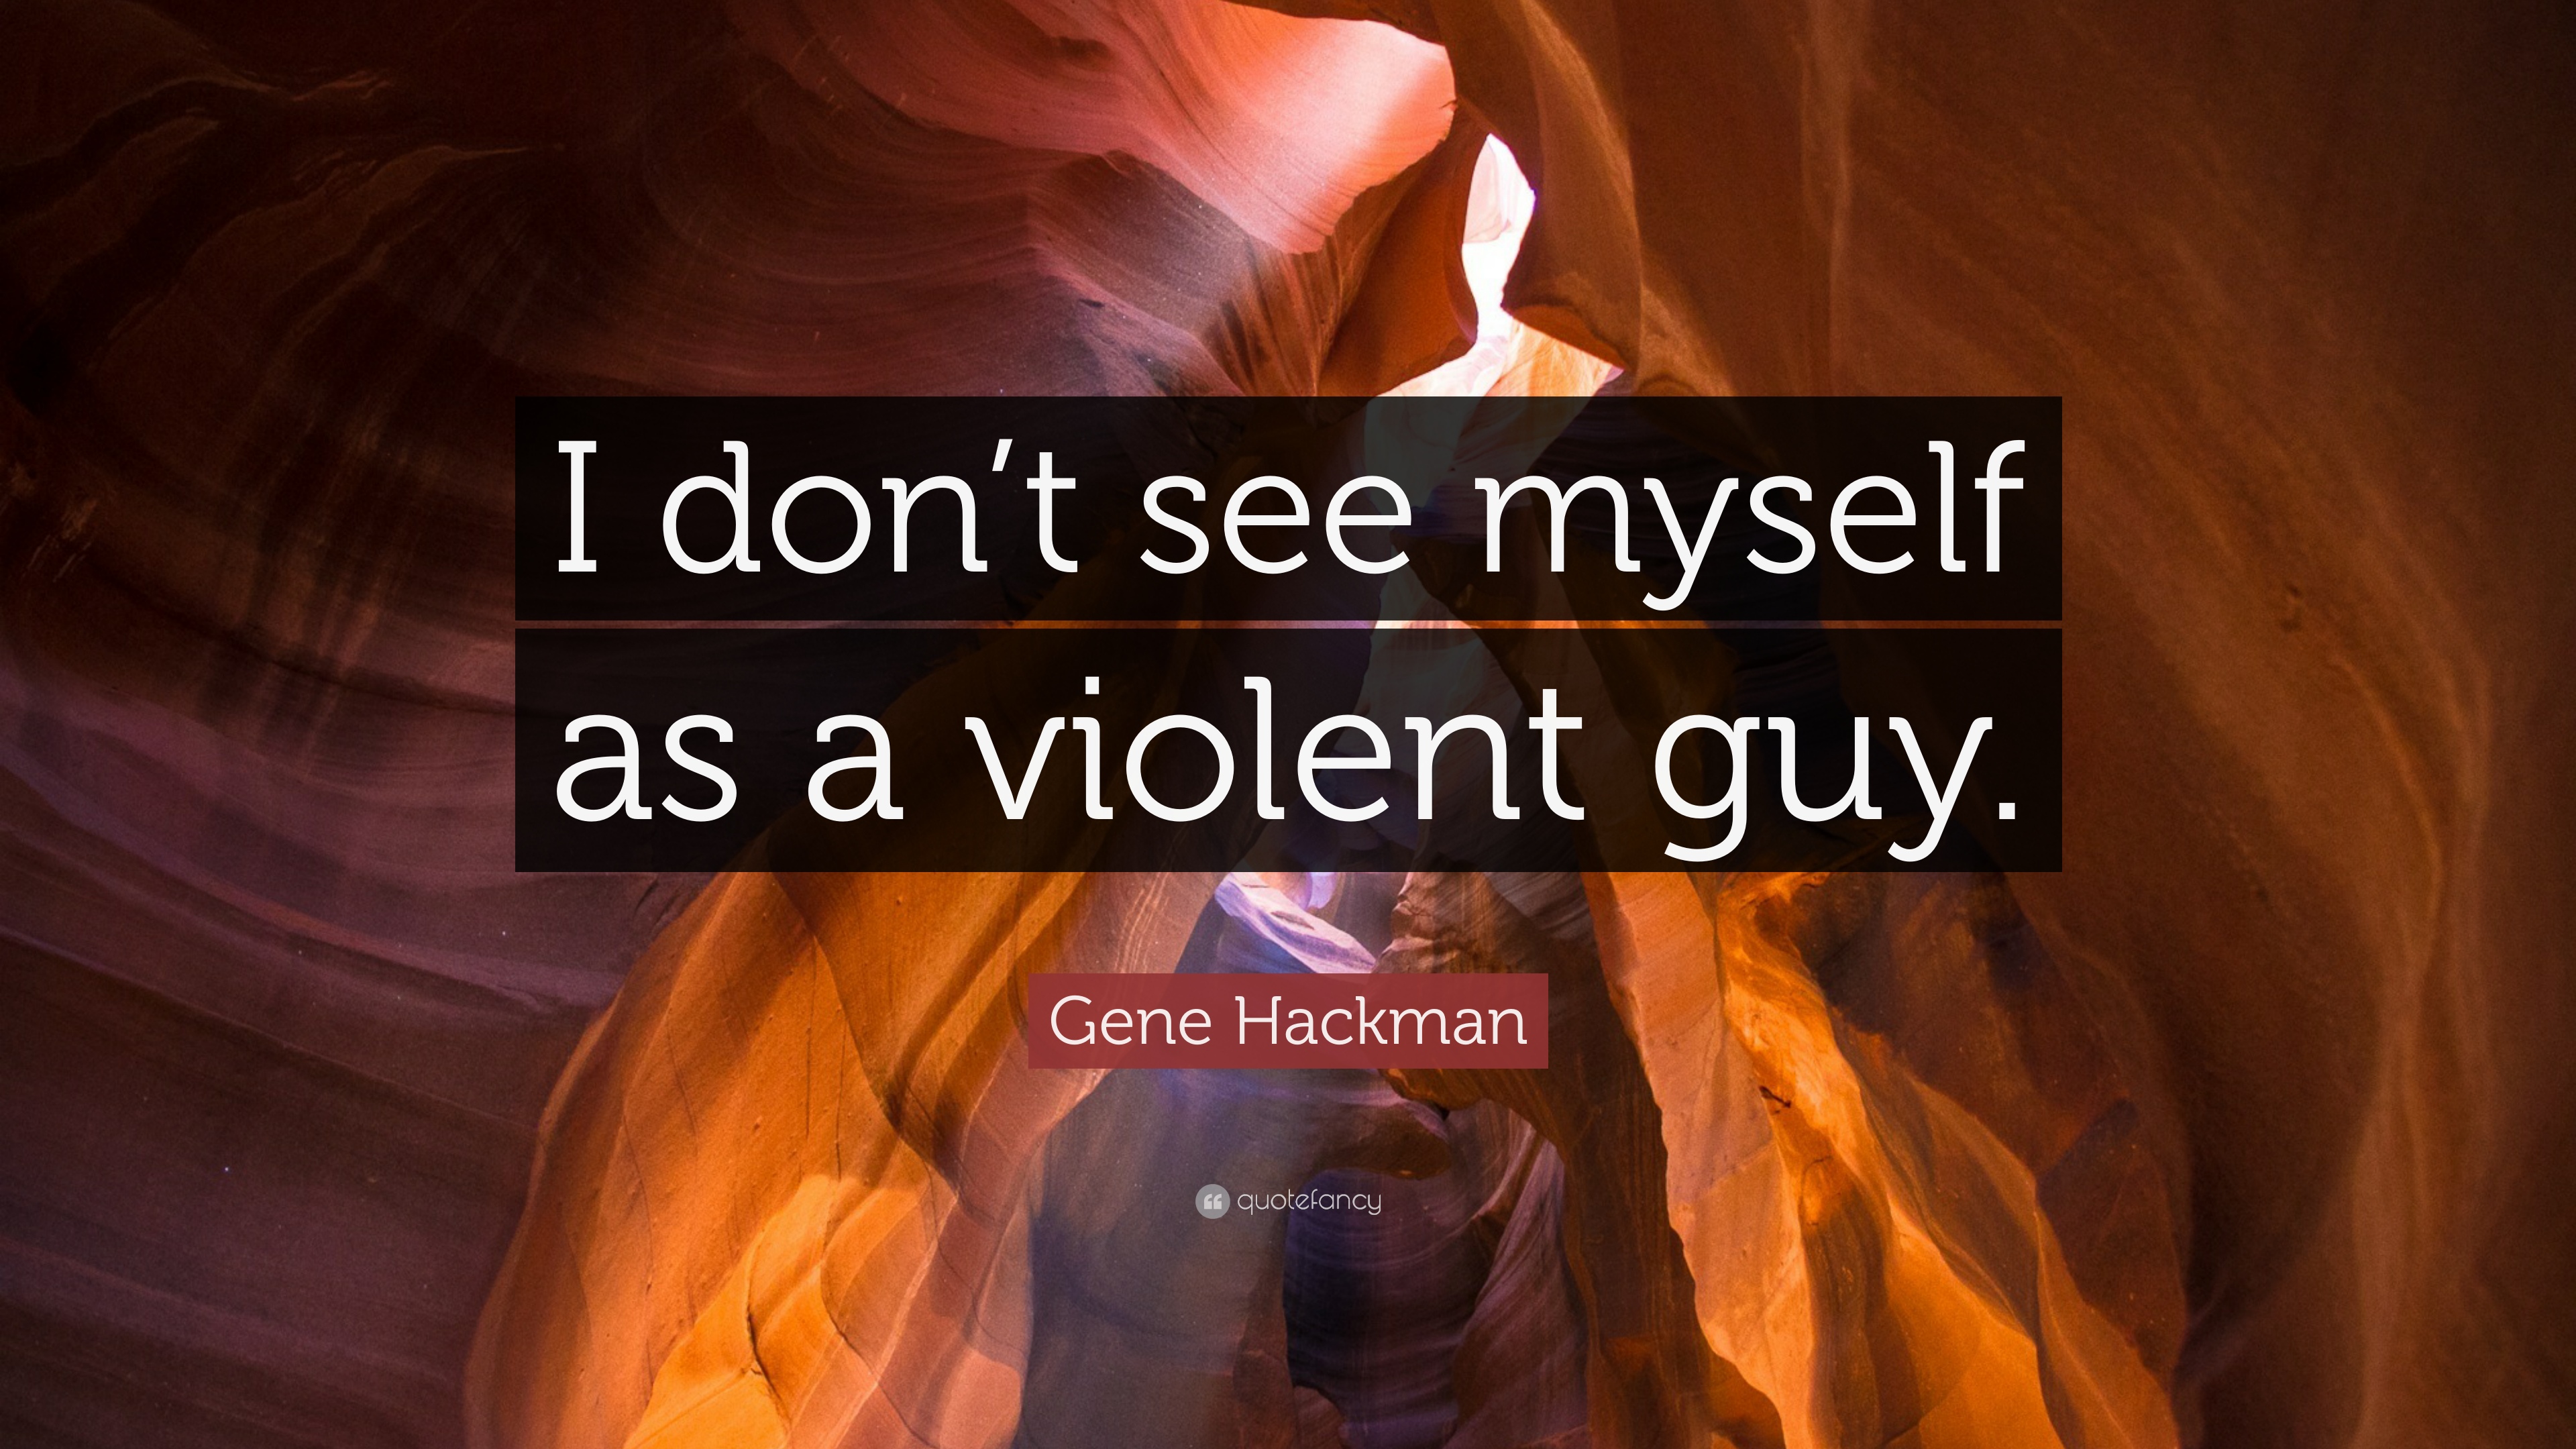 Gene Hackman Quote: “I don't see myself as a violent guy.” 7